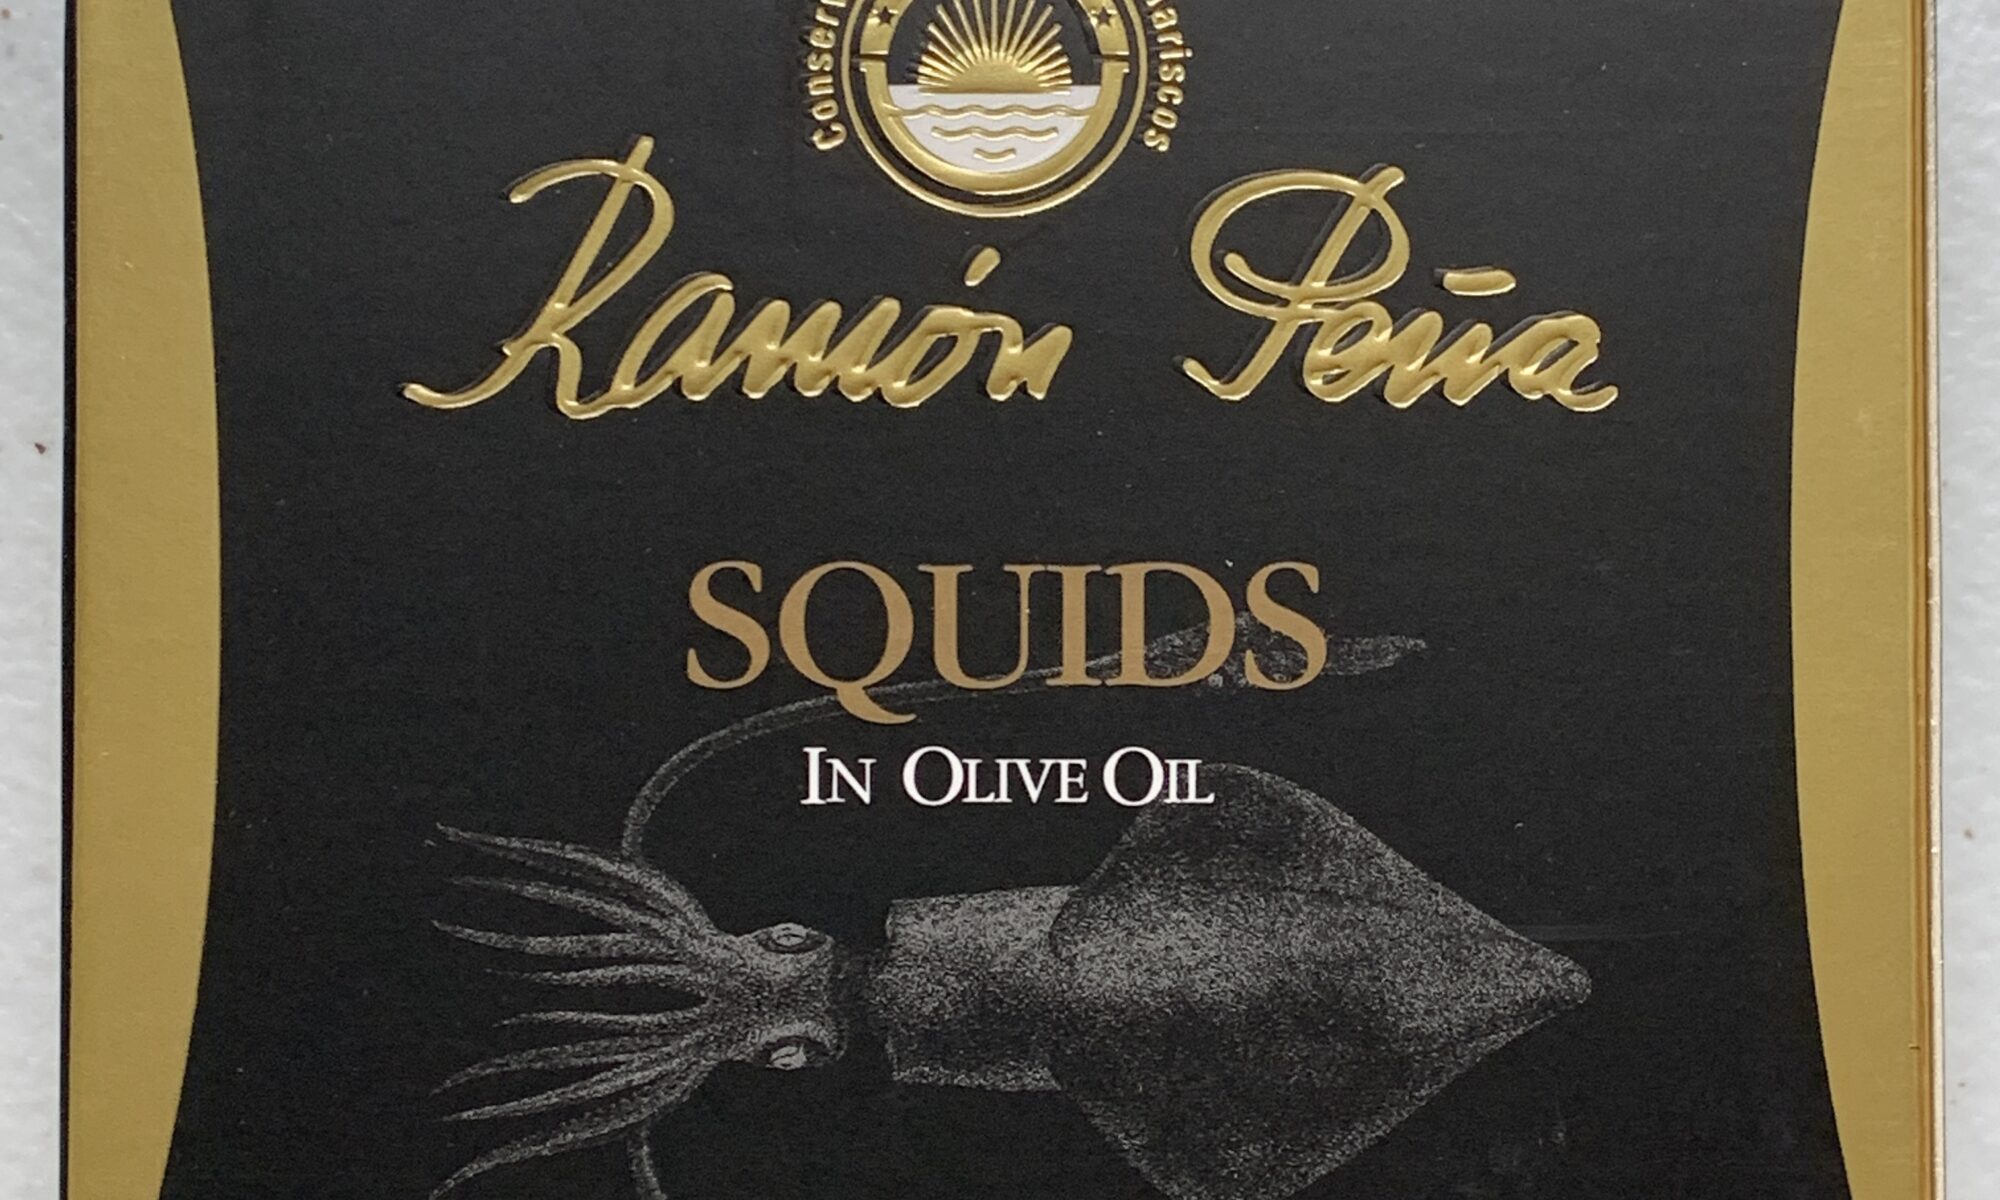 Image of the front of a package of Ramón Peña Squids in Olive Oil